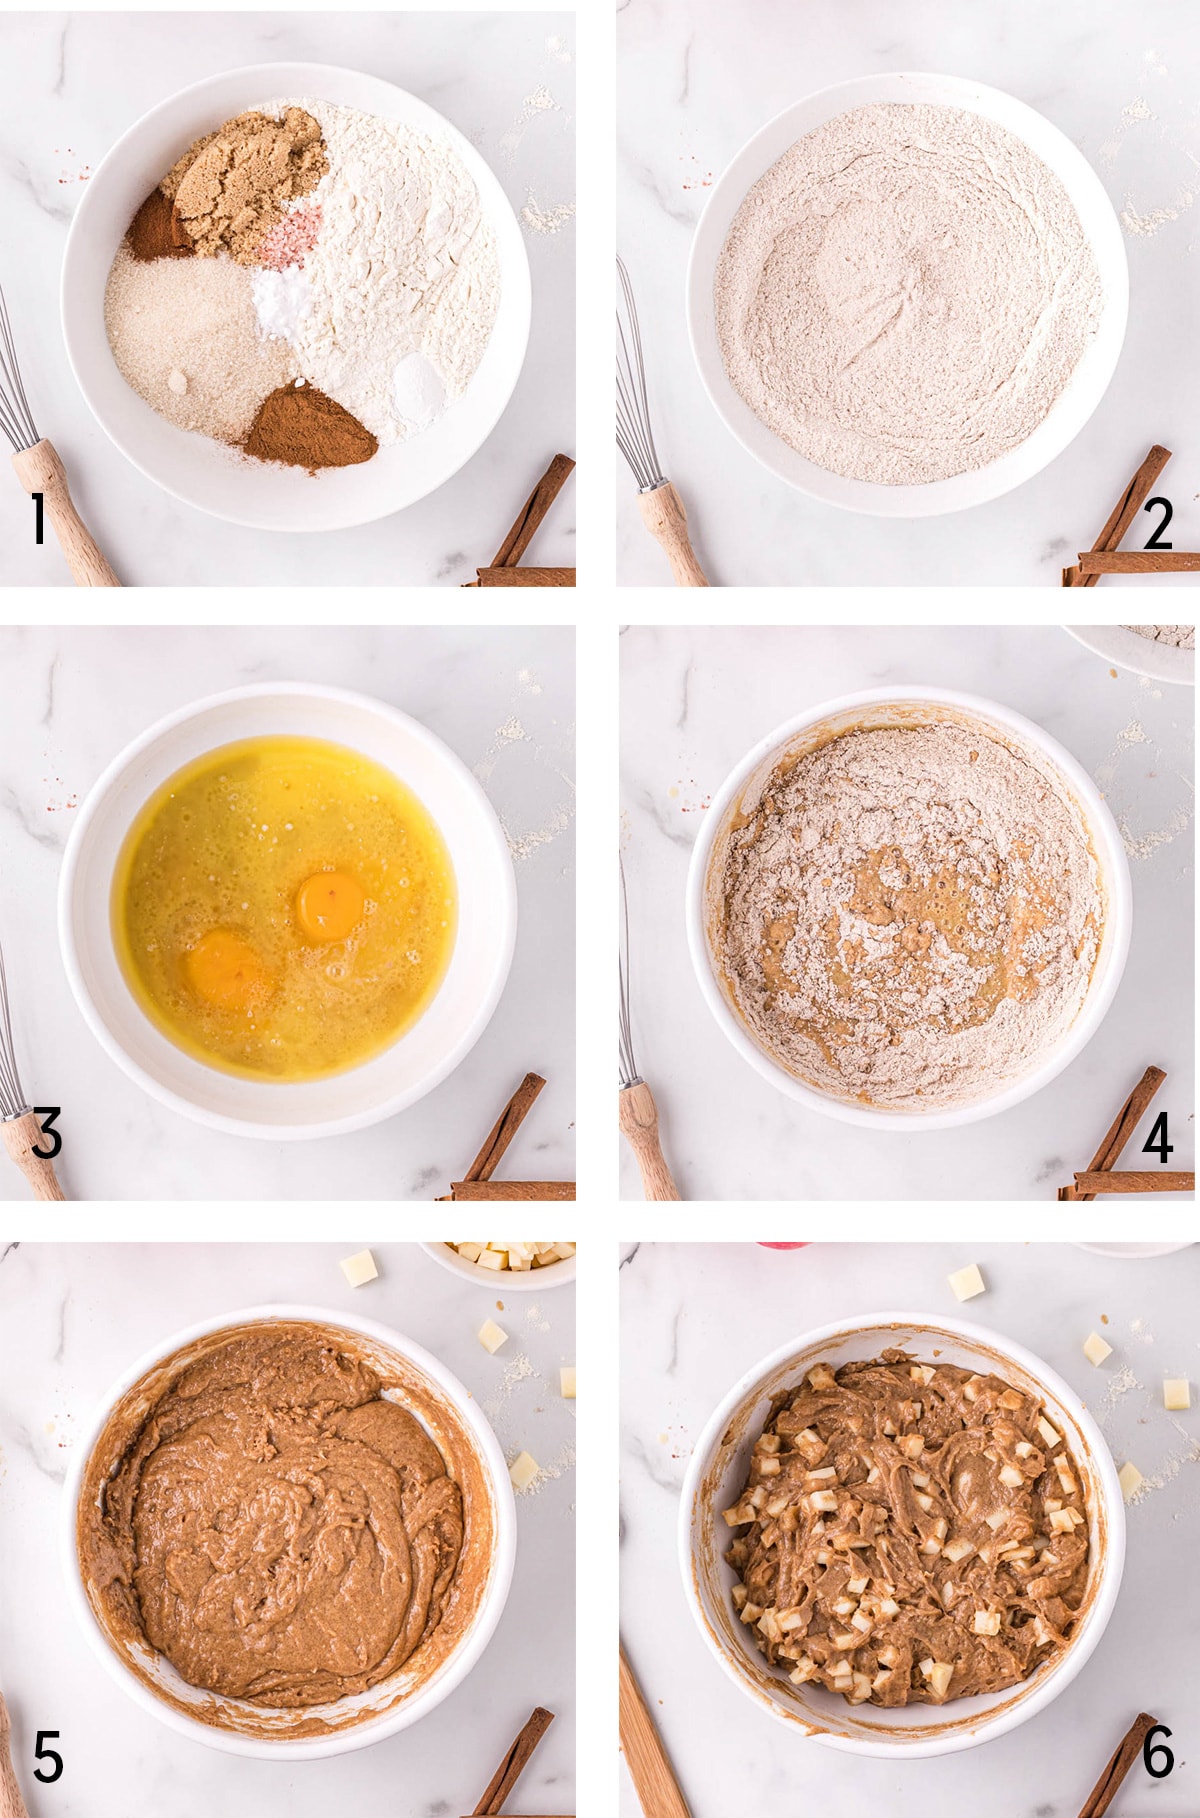 Collage of images showing the process of making apple muffins.